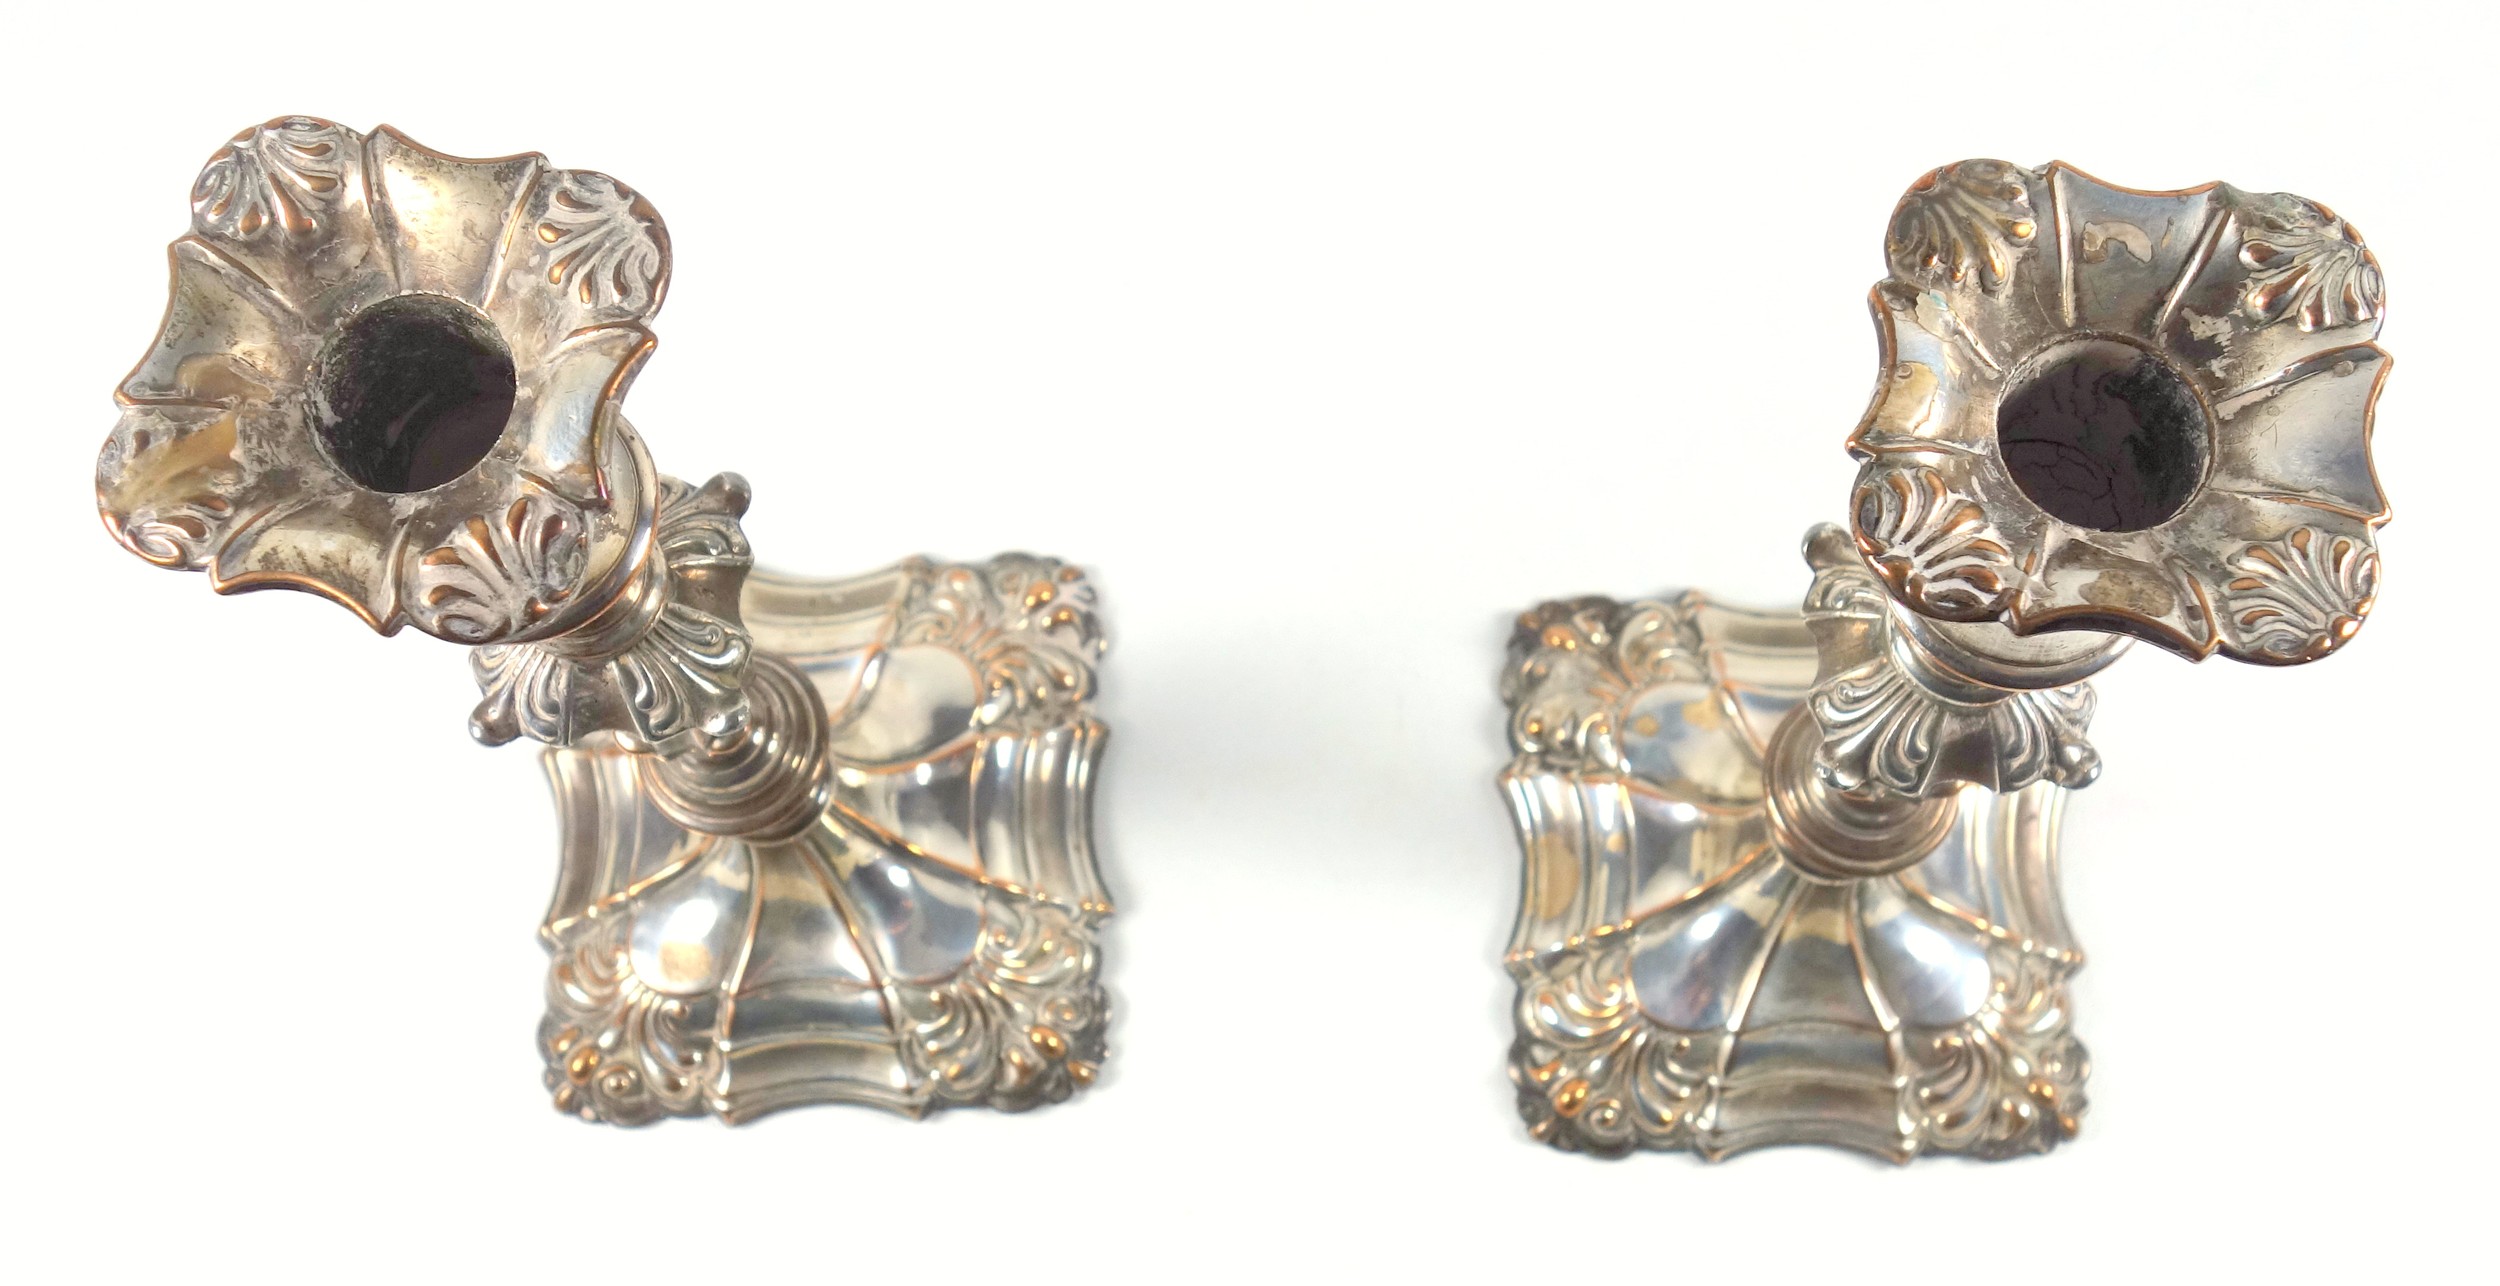 Pair of mid 18th century Old Sheffield plated candlesticks, each with embossed floral decoration, - Bild 3 aus 4